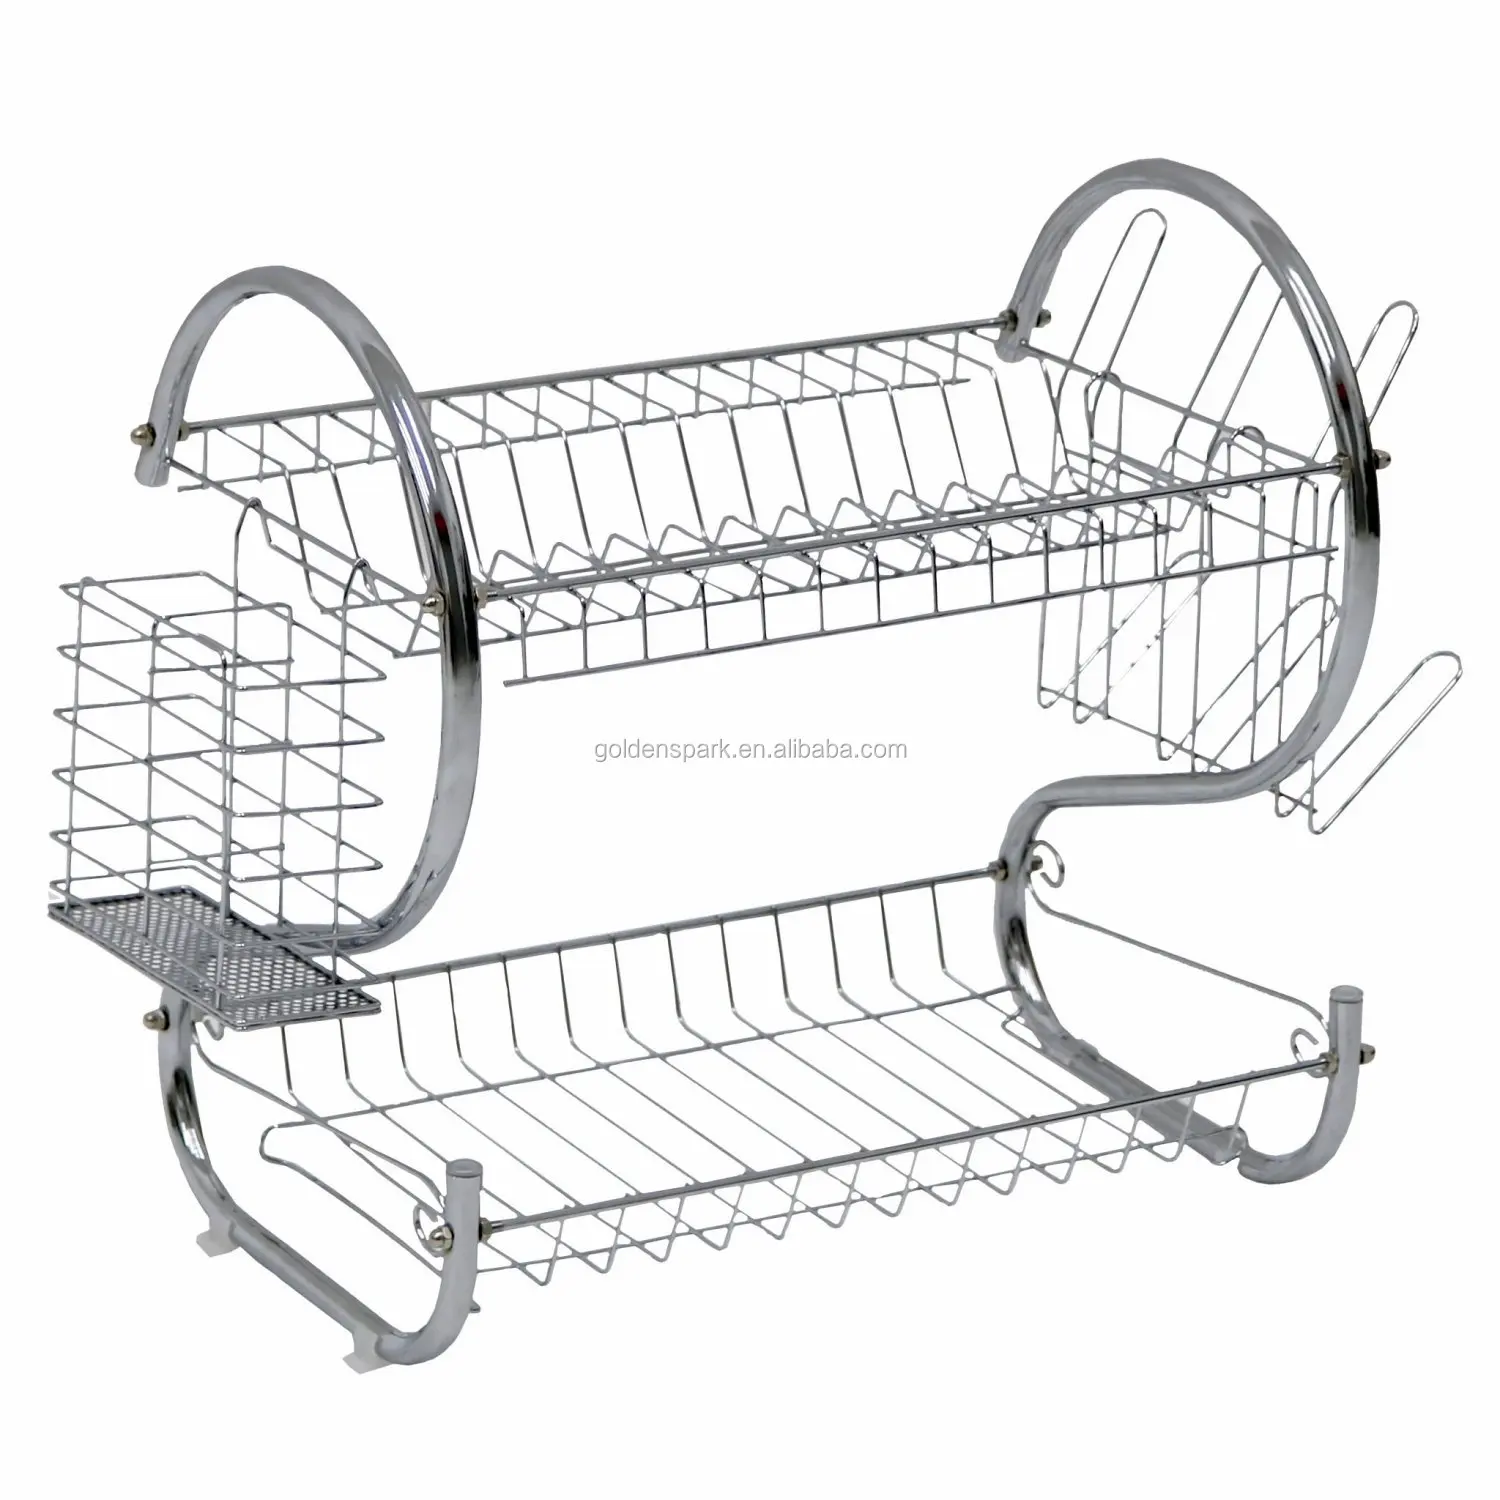 New 2 Tier S-Type Chrome Cutlery Dish Plates Cup Drainer Drip Tray Rack Holder 